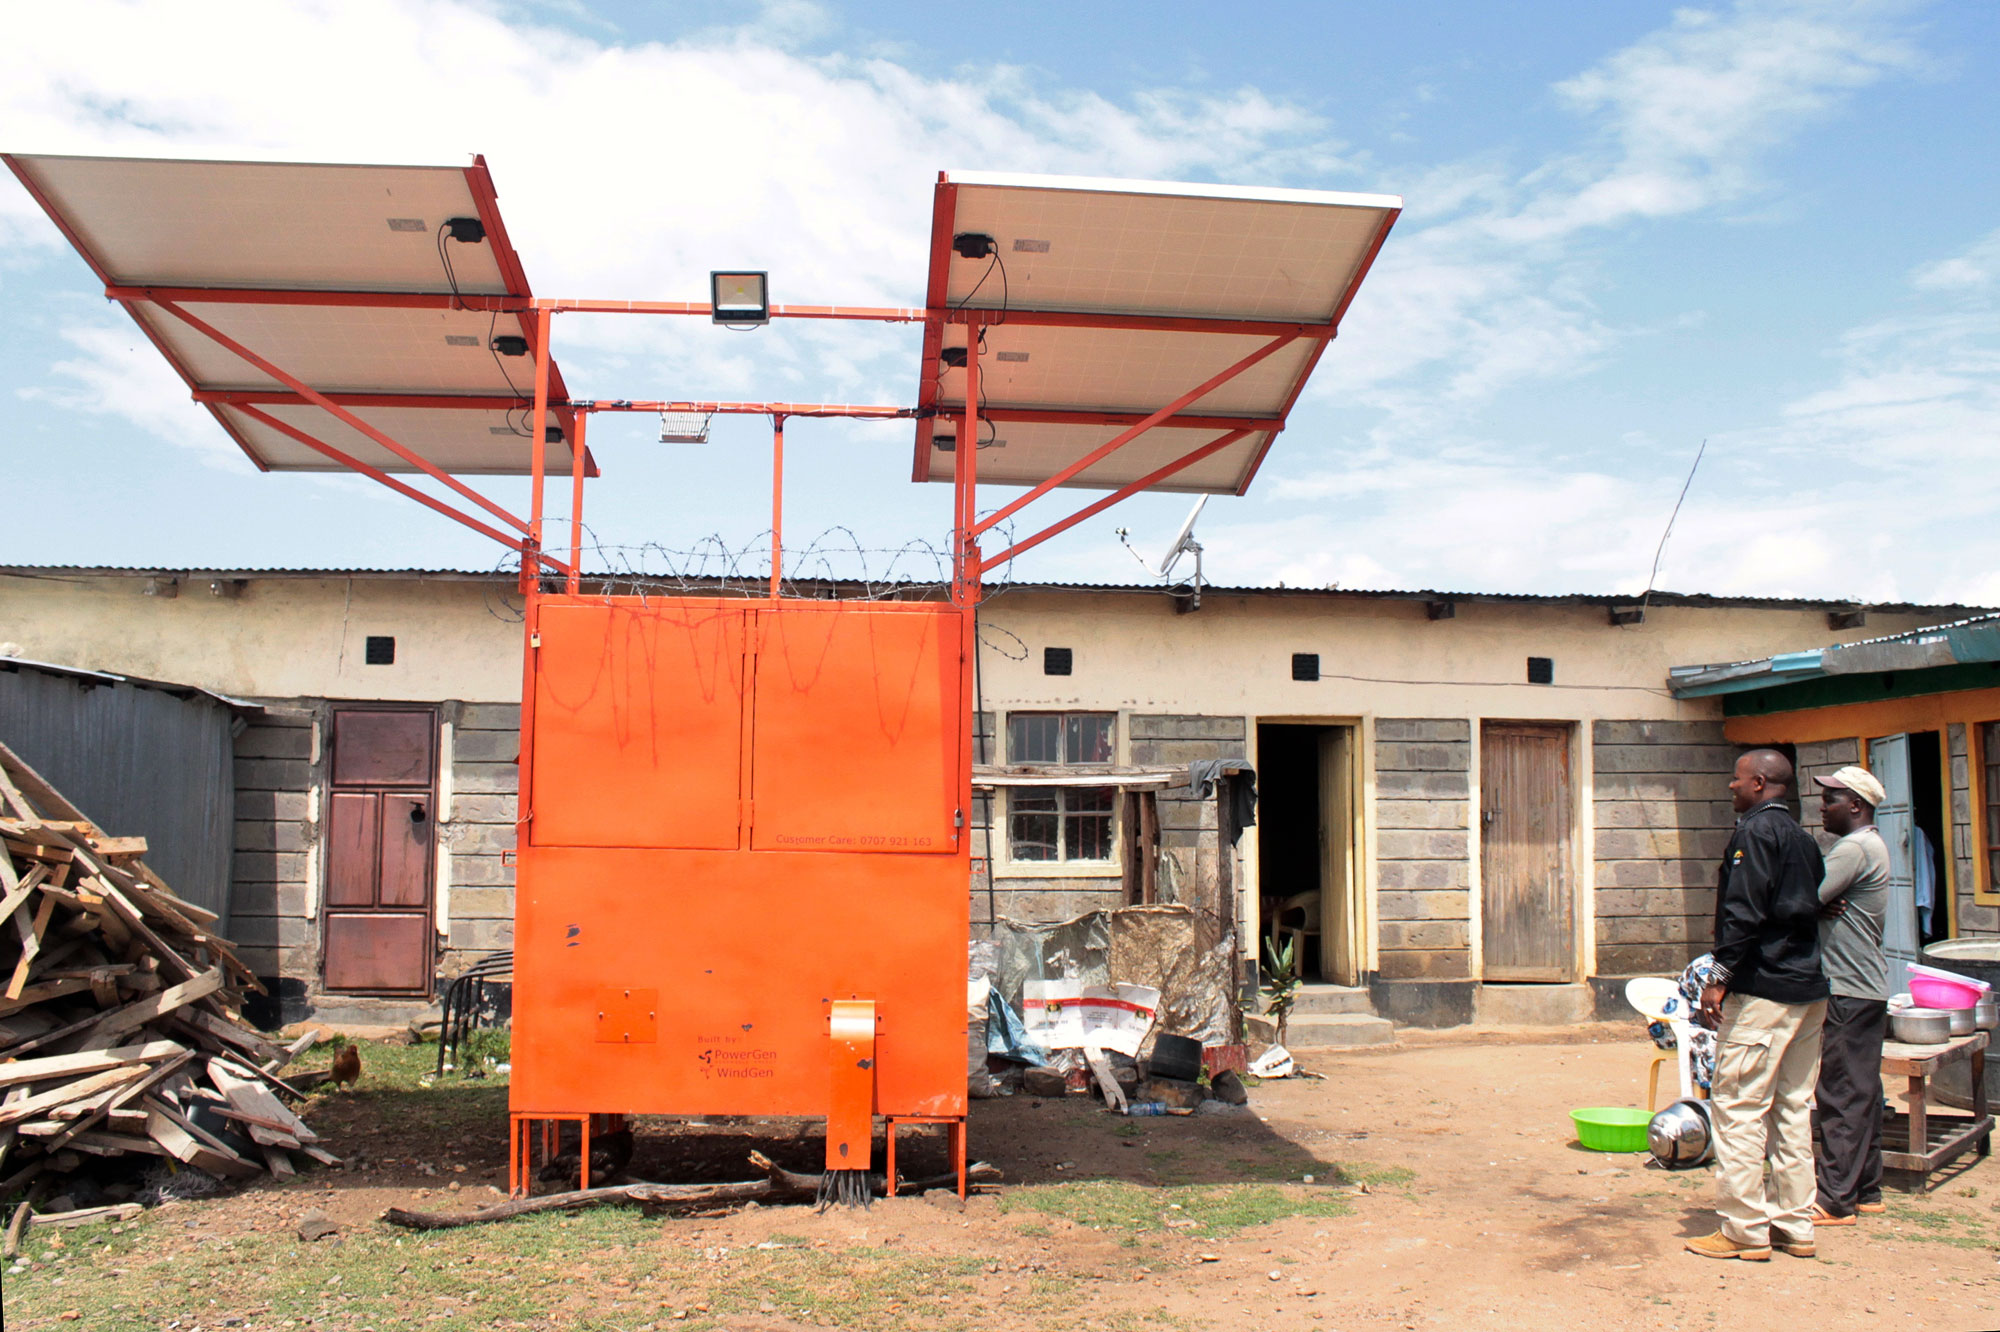 PowerGen's "PowerBox" comprises 1.4kW of solar panels, 9kWh of batteries and a 3kW inverter. It supplies power to 14 clients in Nkoilale, Kenya, all of whom pay for the electricity via mobile phones. Photo by David Sengeh.